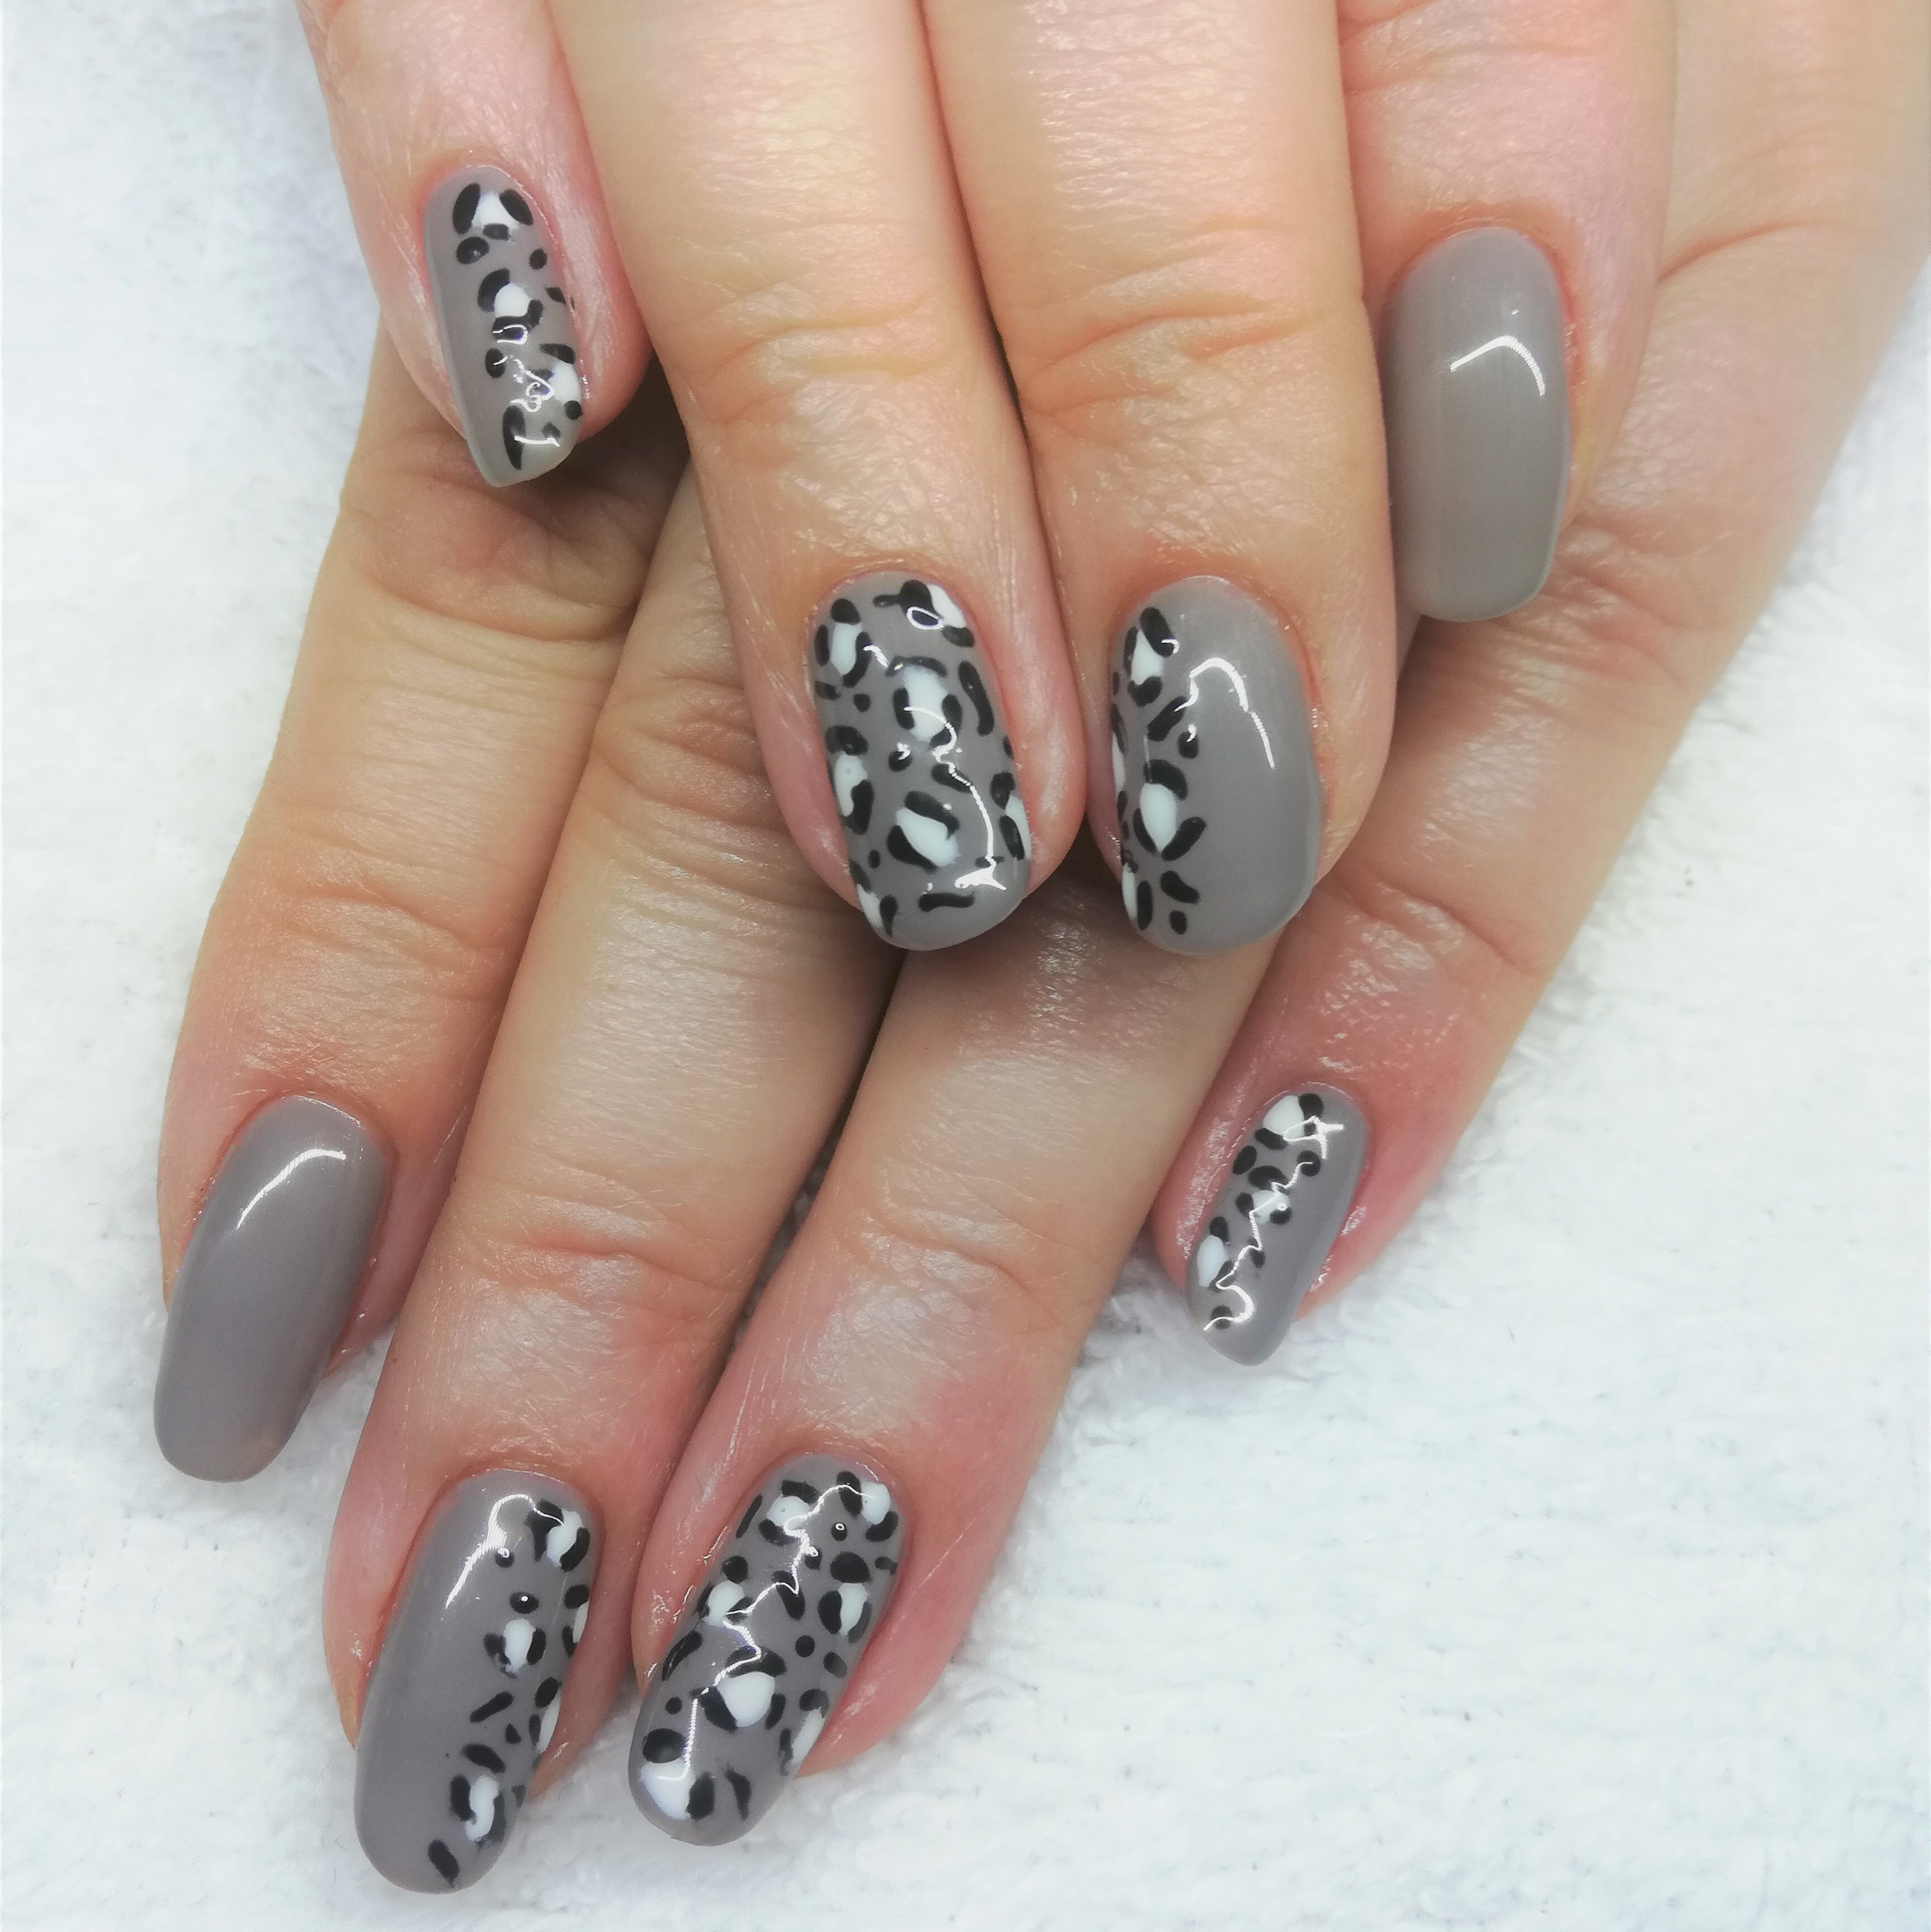 kwnailstylist on X: 💅 starting the new year with some classy leopard  print nails for the ever stylish @SlappedWitch 💅 . #naturalnailsonly  #handpaintednailart #animalprintnails #greynails #graynails #leopardnails  #leopardprintnails #monochromenails